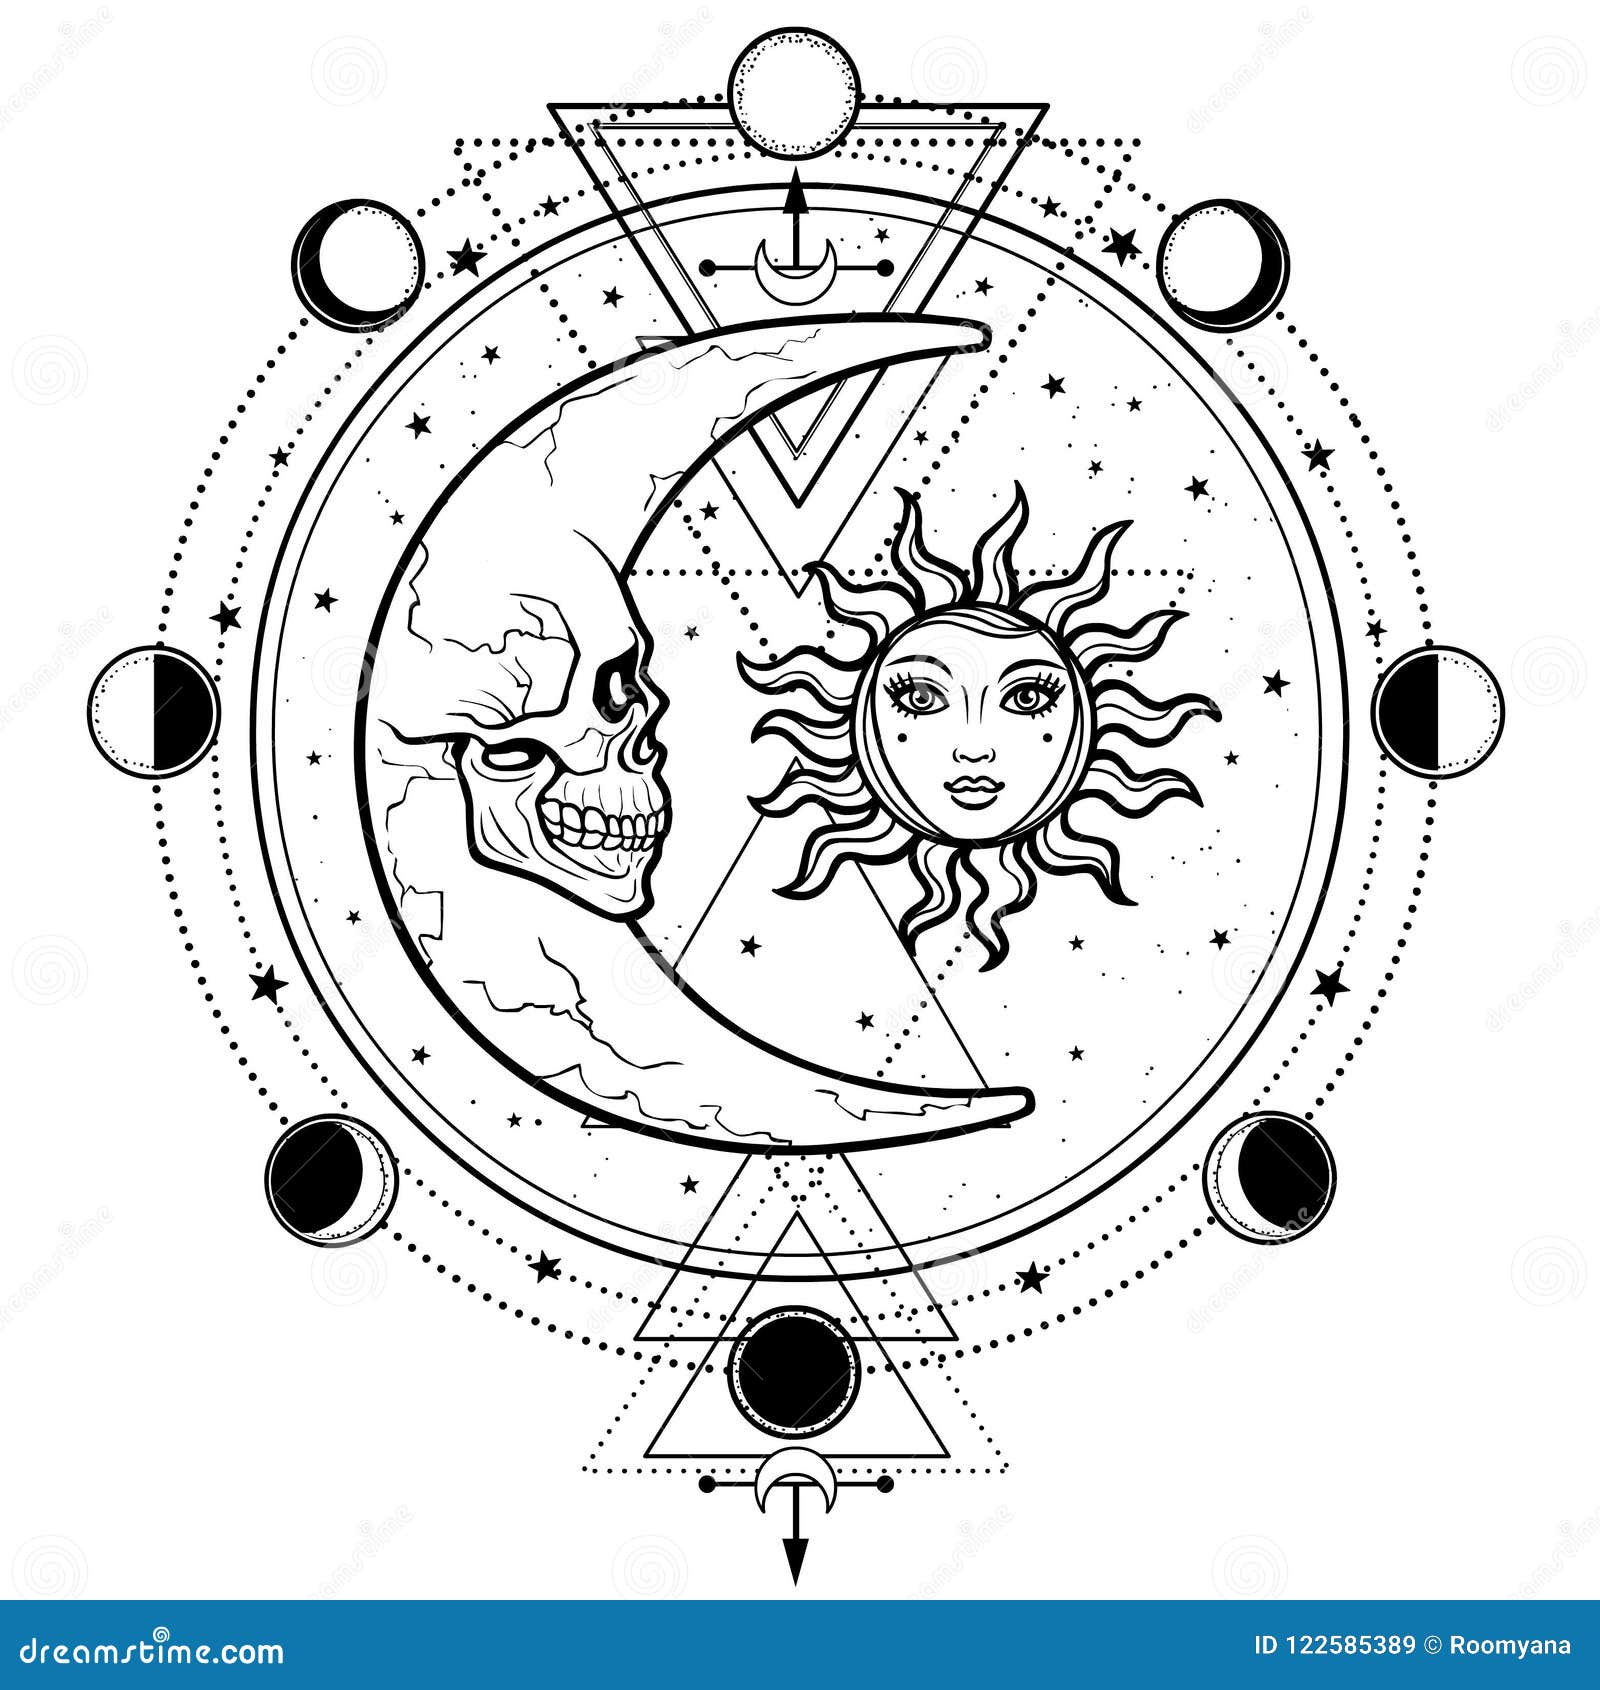 mystical drawing: sun and moon with human faces, circle of a phase of the moon.